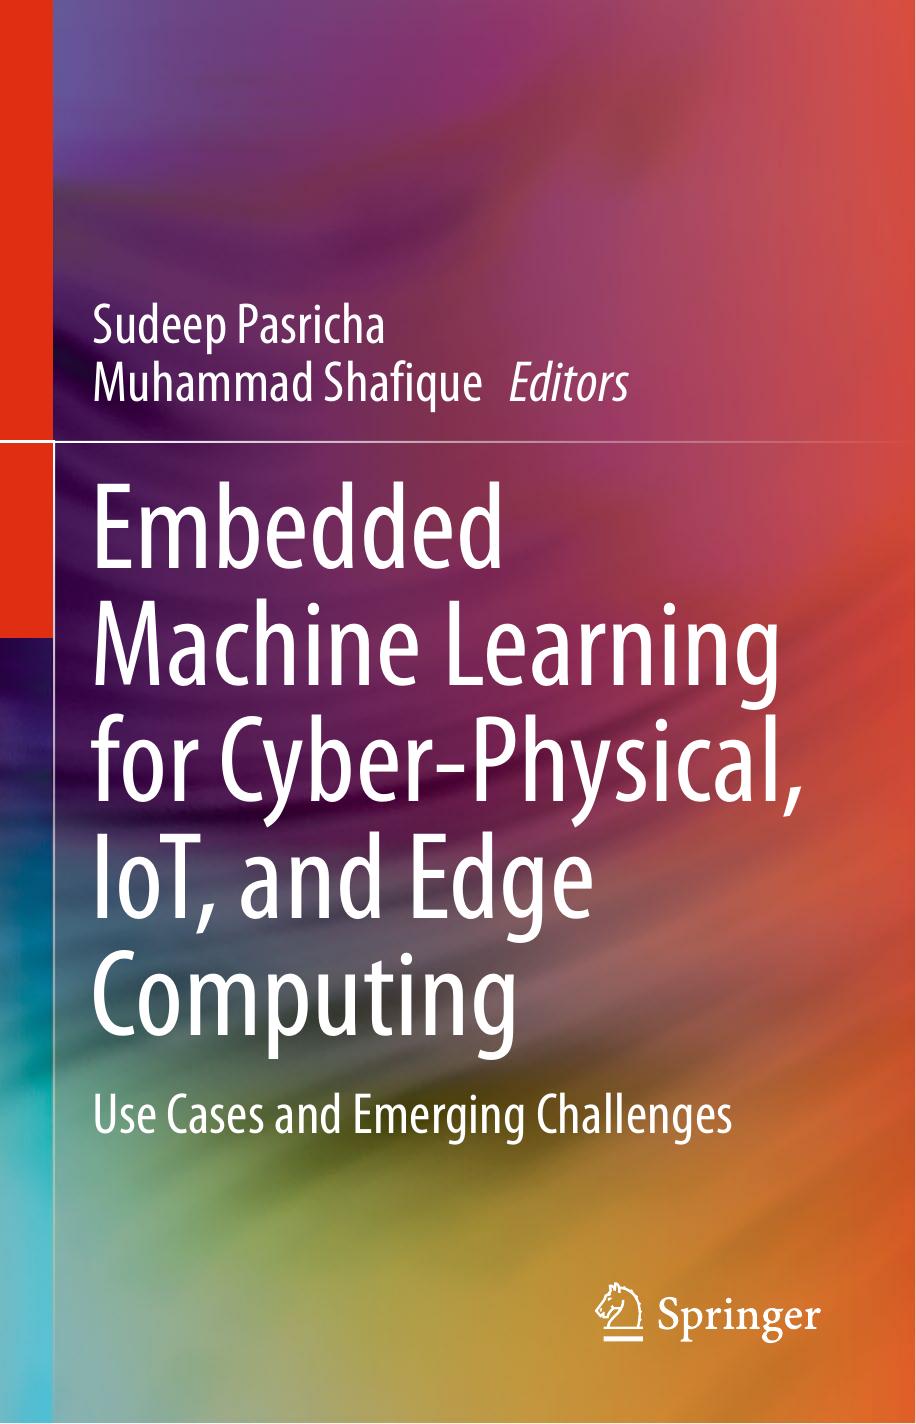 Embedded Machine Learning for Cyber-Physical, IoT, and Edge Computing: Use Cases and Emerging Challenges